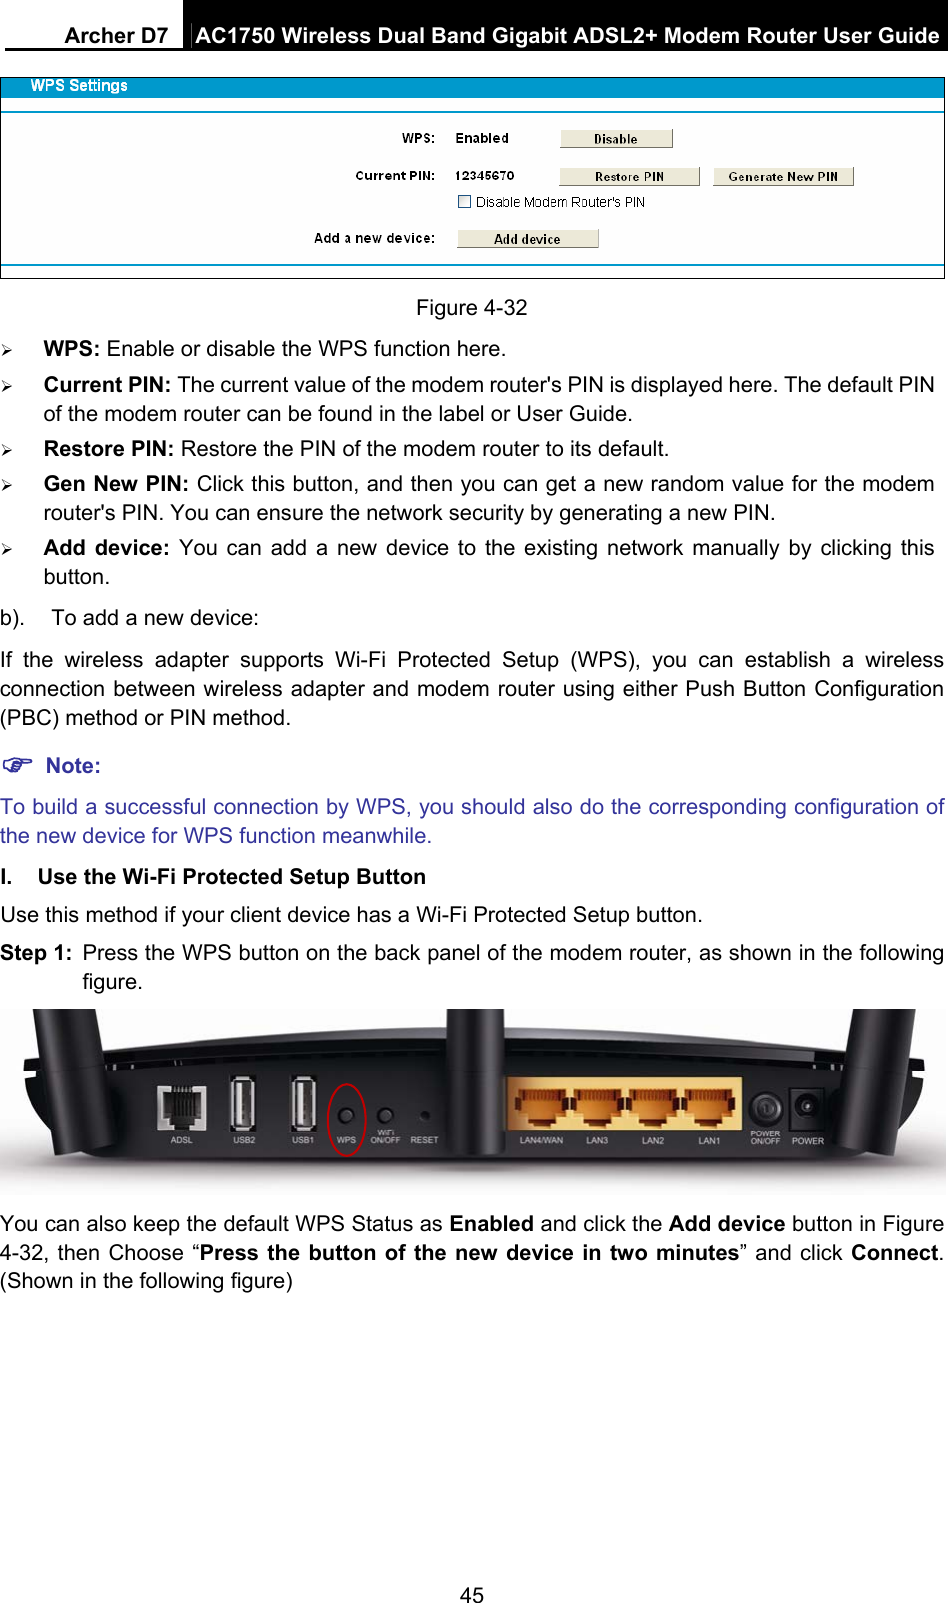 Archer D7  AC1750 Wireless Dual Band Gigabit ADSL2+ Modem Router User Guide 45  Figure 4-32  WPS: Enable or disable the WPS function here.    Current PIN: The current value of the modem router&apos;s PIN is displayed here. The default PIN of the modem router can be found in the label or User Guide.    Restore PIN: Restore the PIN of the modem router to its default.    Gen New PIN: Click this button, and then you can get a new random value for the modem router&apos;s PIN. You can ensure the network security by generating a new PIN.  Add device: You can add a new device to the existing network manually by clicking this button. b).  To add a new device: If the wireless adapter supports Wi-Fi Protected Setup (WPS), you can establish a wireless connection between wireless adapter and modem router using either Push Button Configuration (PBC) method or PIN method.  Note: To build a successful connection by WPS, you should also do the corresponding configuration of the new device for WPS function meanwhile. I.  Use the Wi-Fi Protected Setup Button Use this method if your client device has a Wi-Fi Protected Setup button. Step 1:  Press the WPS button on the back panel of the modem router, as shown in the following figure.  You can also keep the default WPS Status as Enabled and click the Add device button in Figure 4-32, then Choose “Press the button of the new device in two minutes” and click Connect. (Shown in the following figure) 